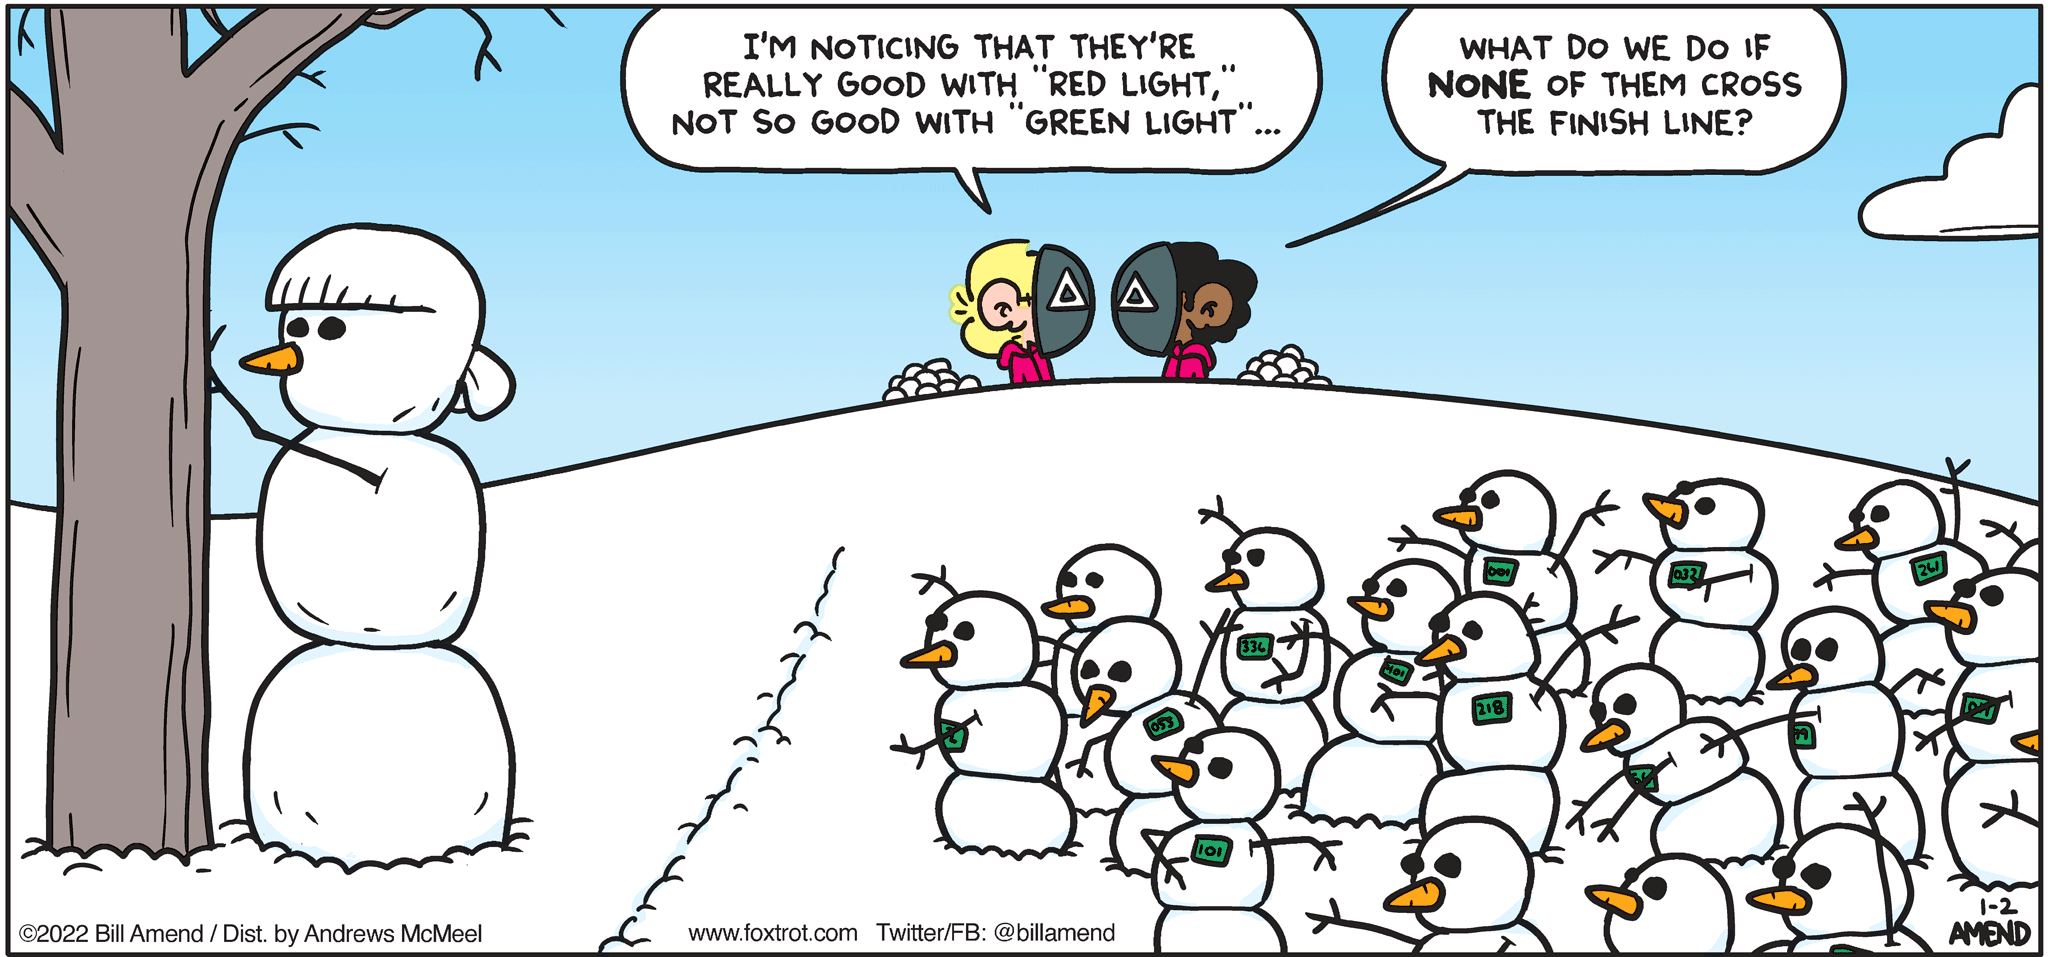 FoxTrot comic strip by Bill Amend - "Winter Games" published January 2, 2022 - Transcript: Jason Fox: I'm noticing that they're really good with "red light," not so good with "green light" ... Marcus Jones: What do we do if NONE of them cross the finish line?